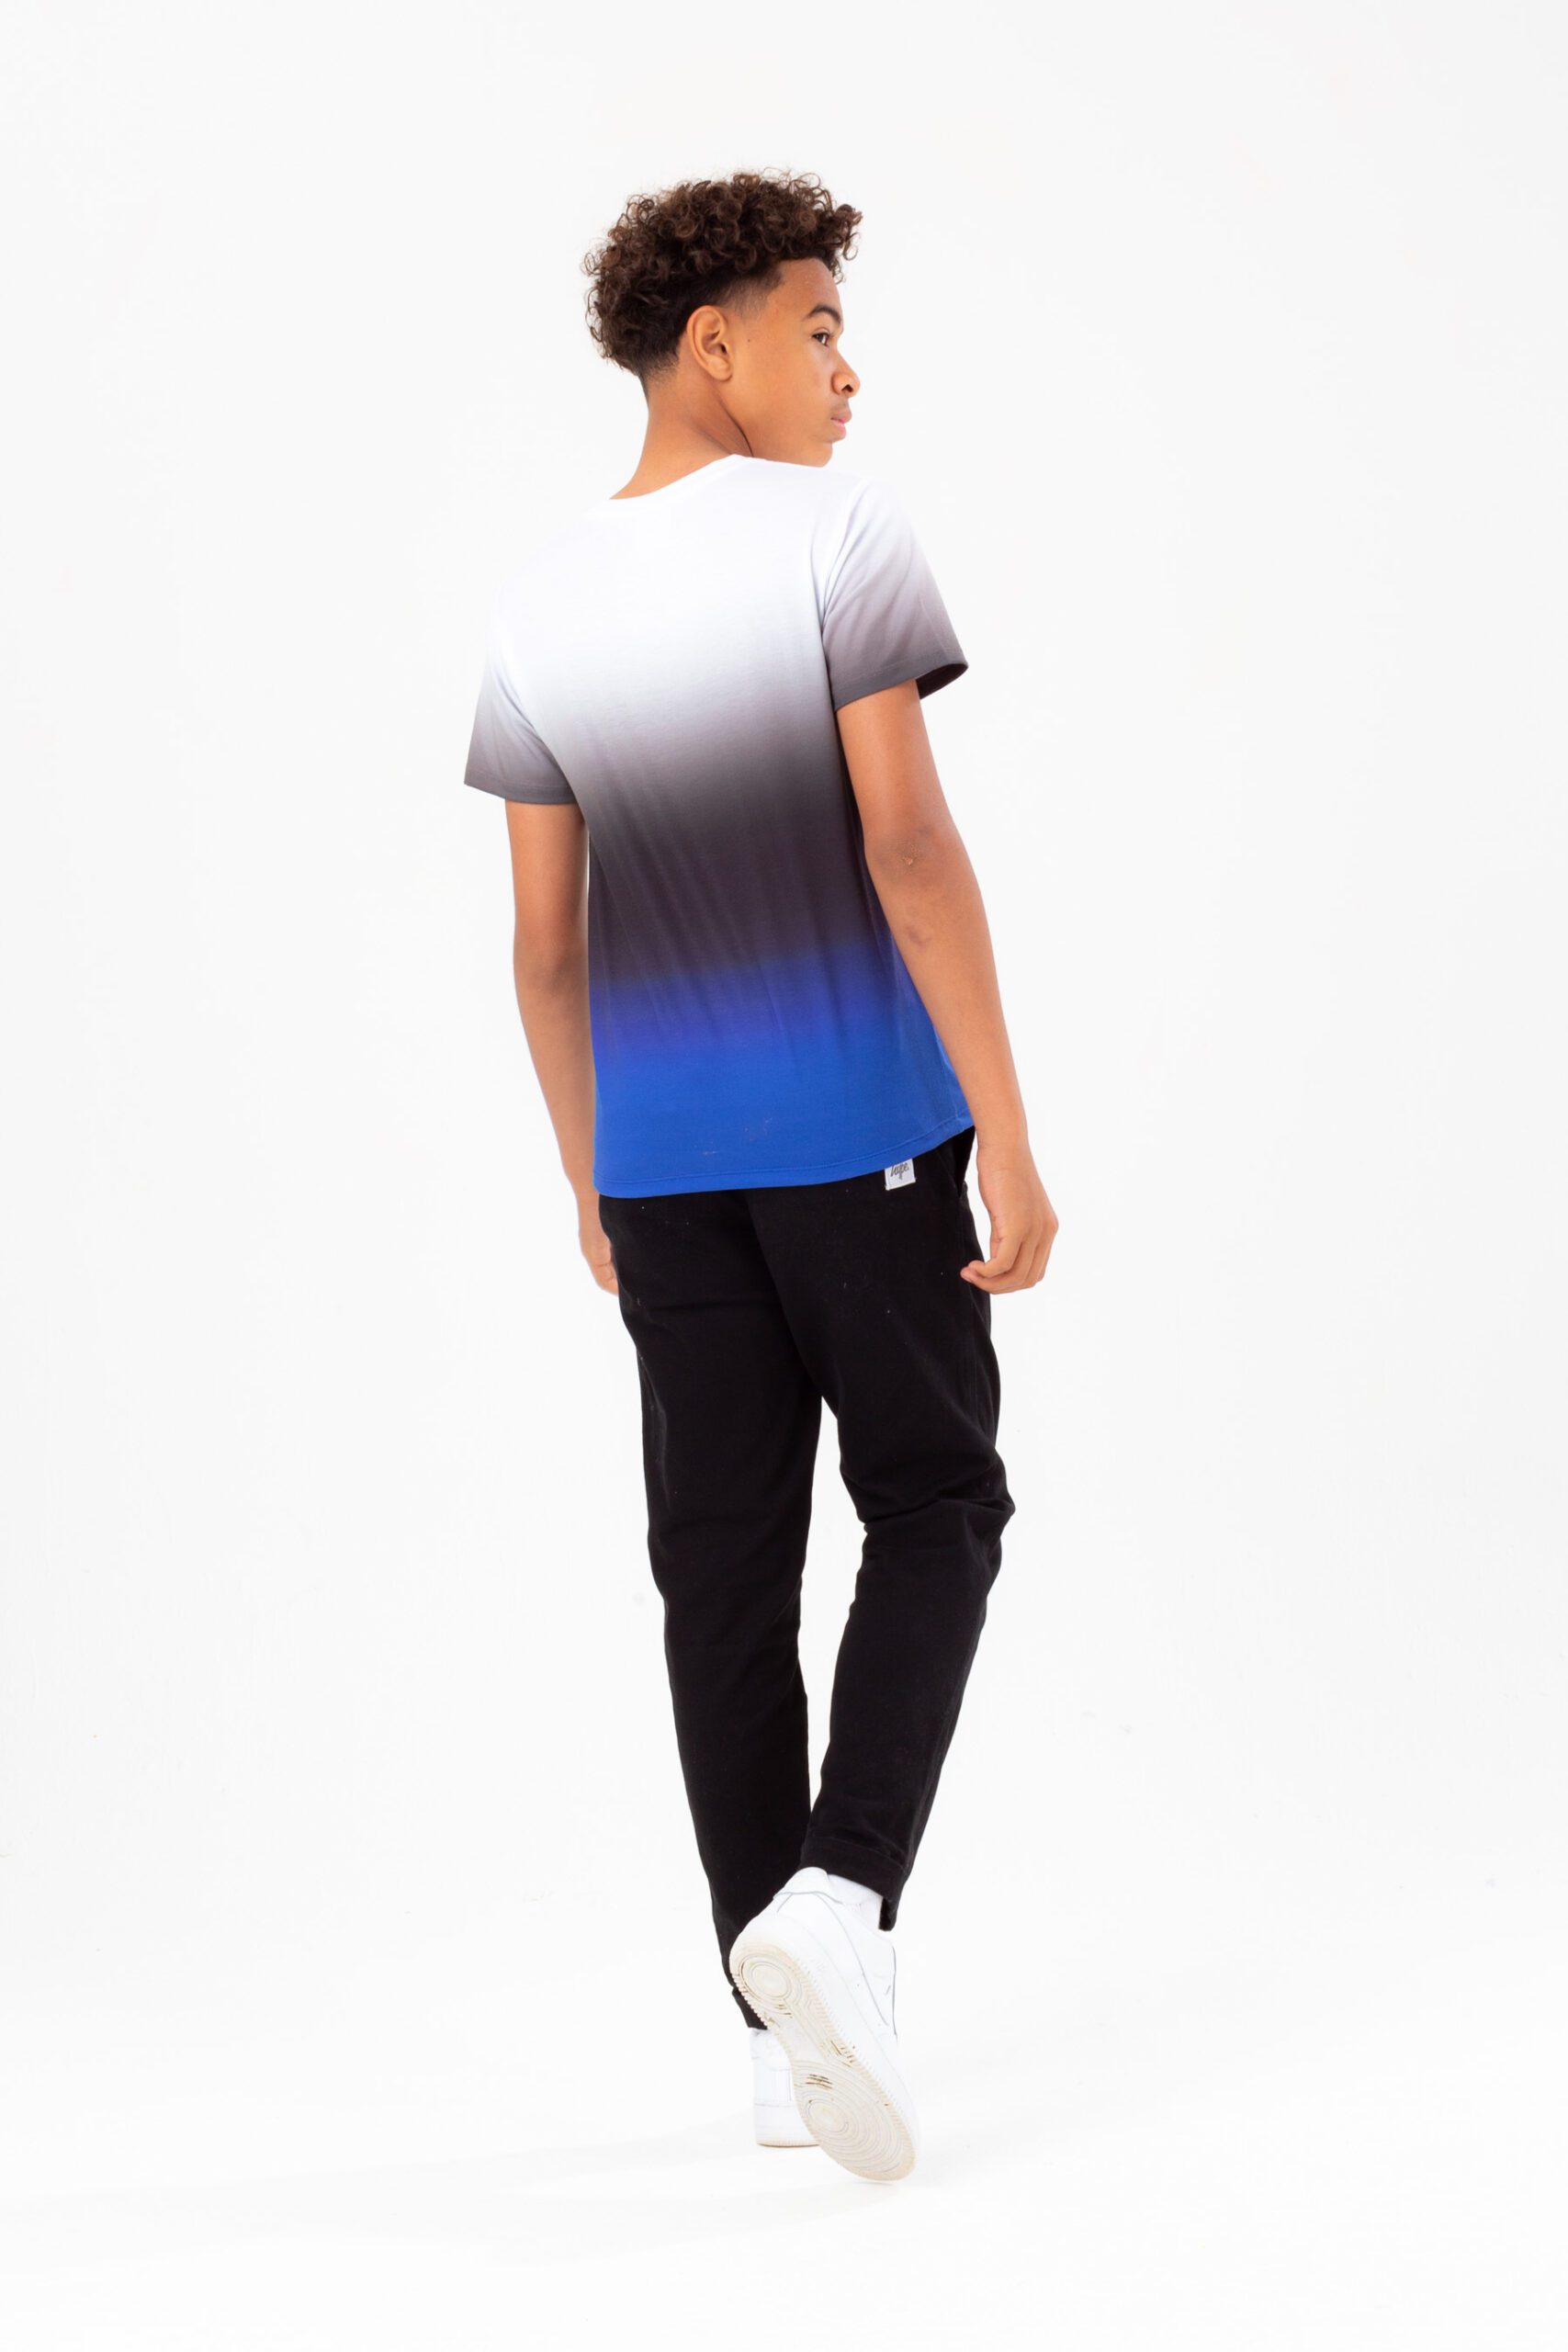 hype boys gradient blue and black tshirt on model back view